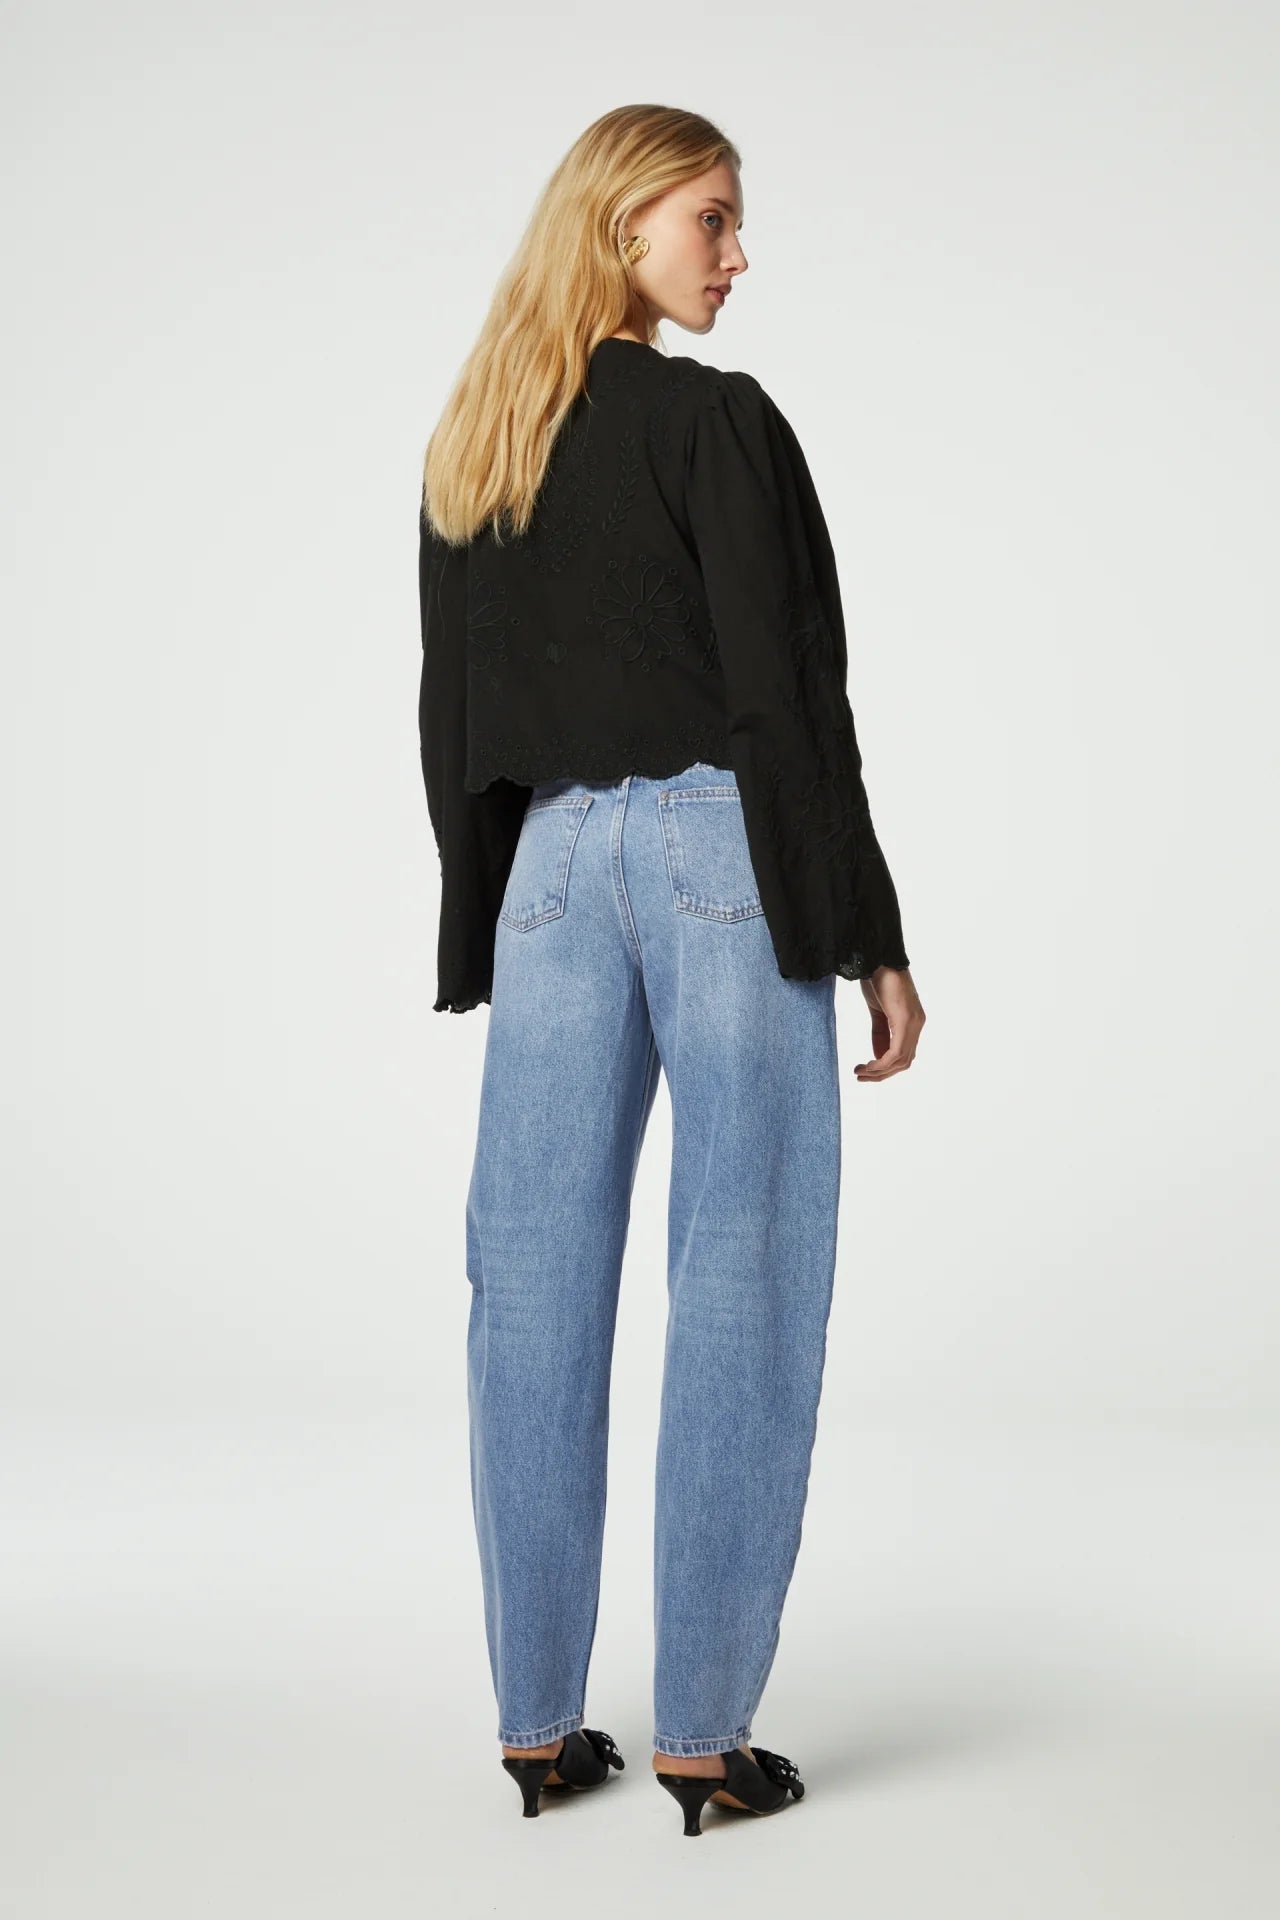 A woman in high waisted jeans showcasing a feminine look from the back wearing the Sterre Top in Black by Fabienne Chapot.